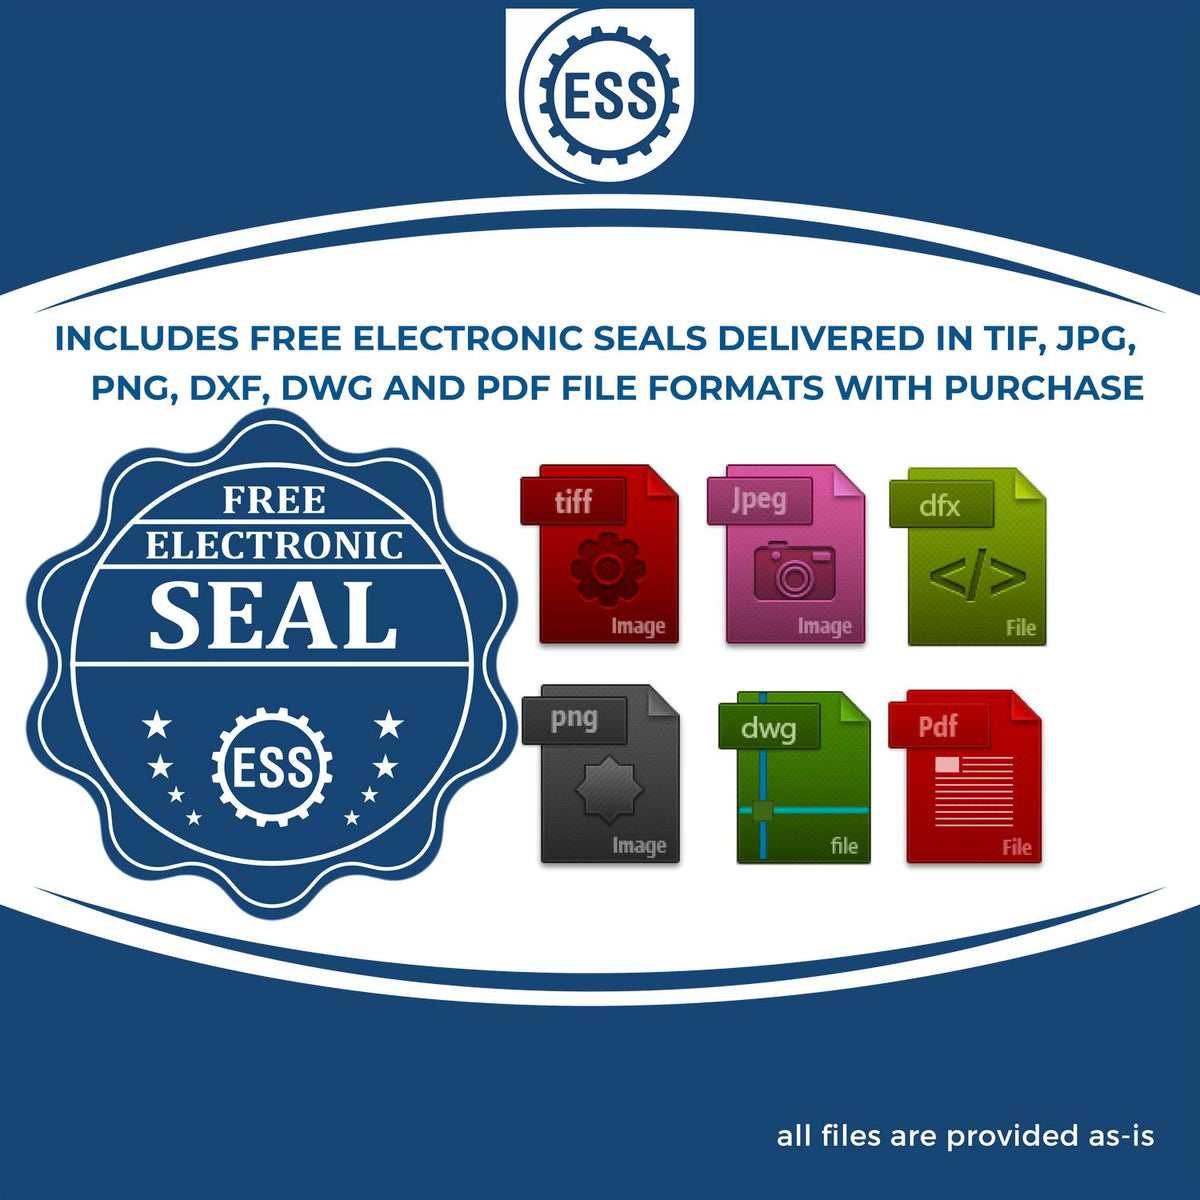 An infographic for the free electronic seal for the Handheld Hawaii Land Surveyor Seal illustrating the different file type icons such as DXF, DWG, TIF, JPG and PNG.